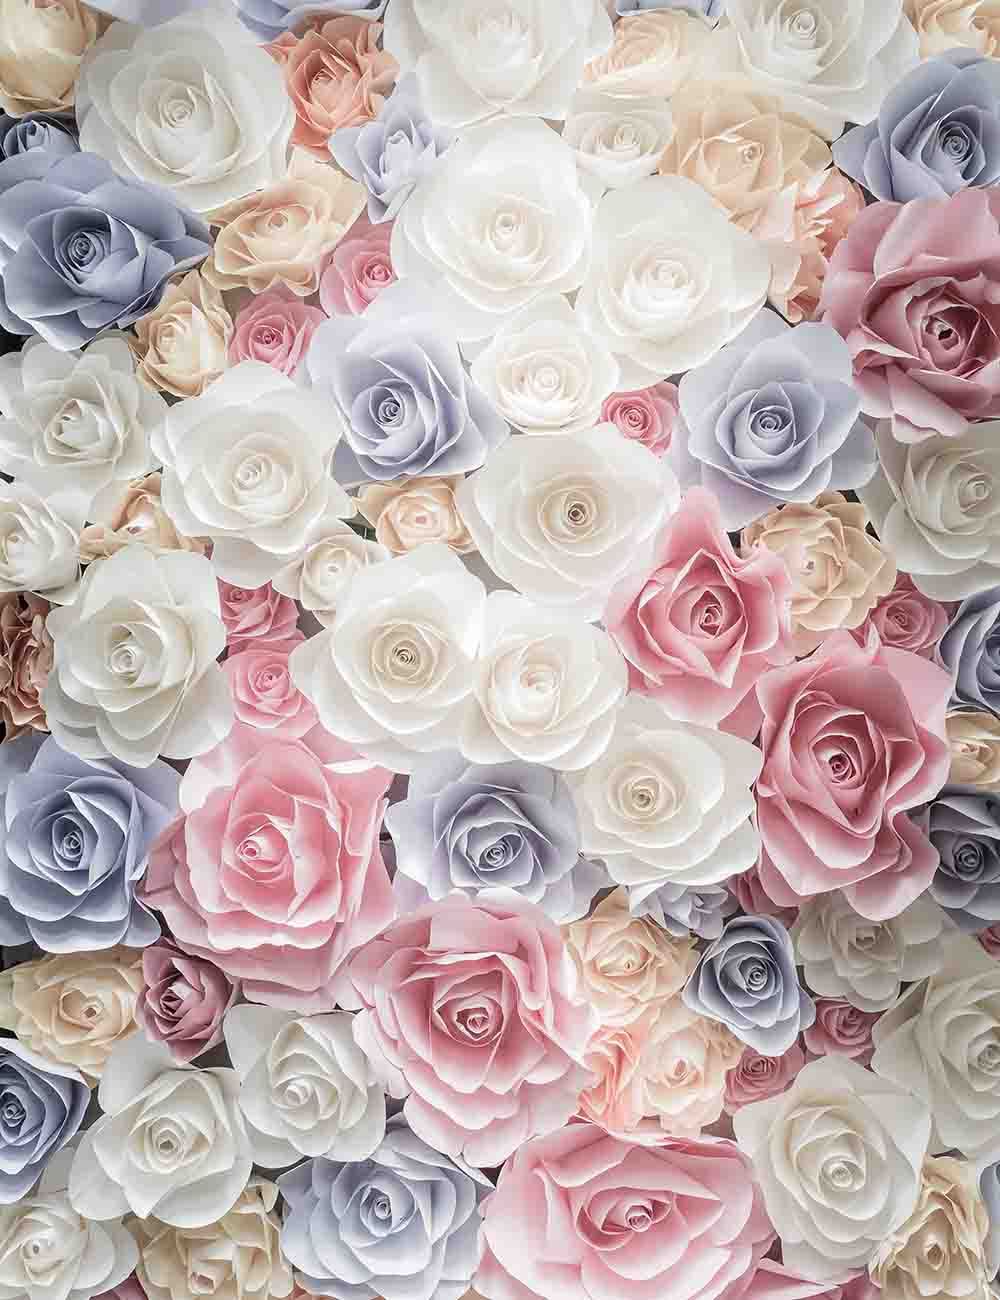 Colorful Flower Wall For Wedding Photography Backdrop Shopbackdrop